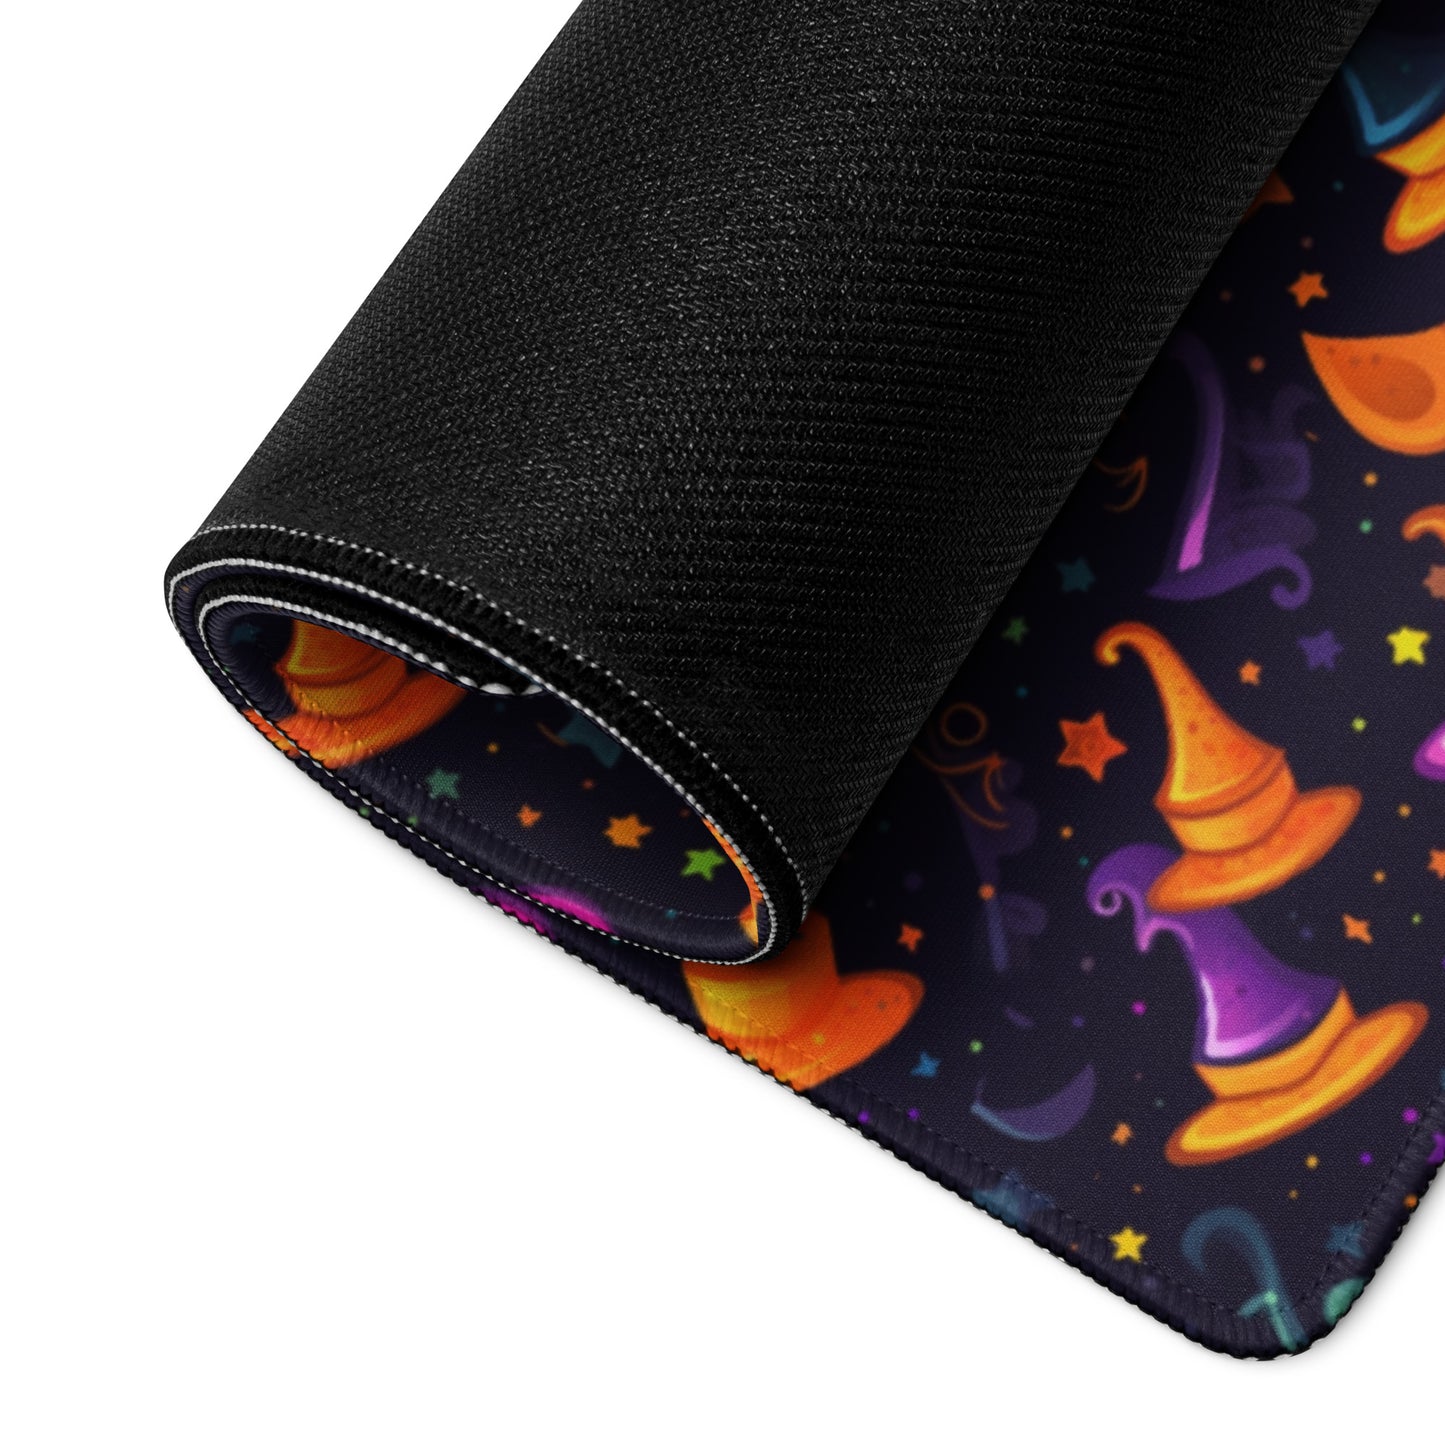 A 36" x 18" desk pad with a orange and purple wizard hat pattern rolled up.